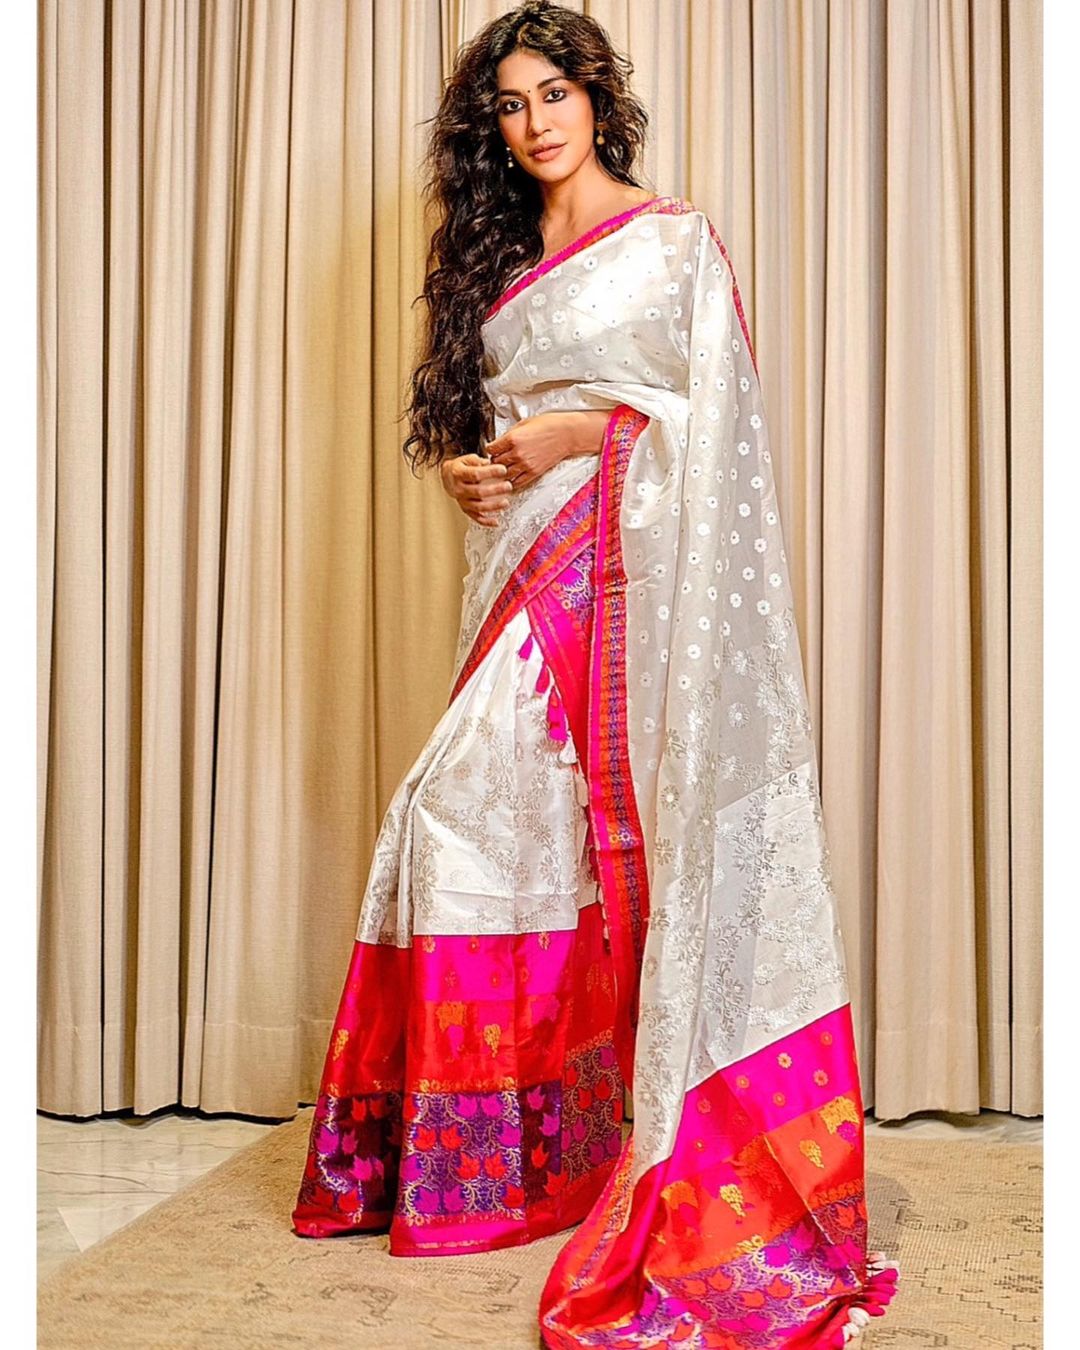 Chitrangda Singh is a picture of elegance in the white saree with the vibrant border.